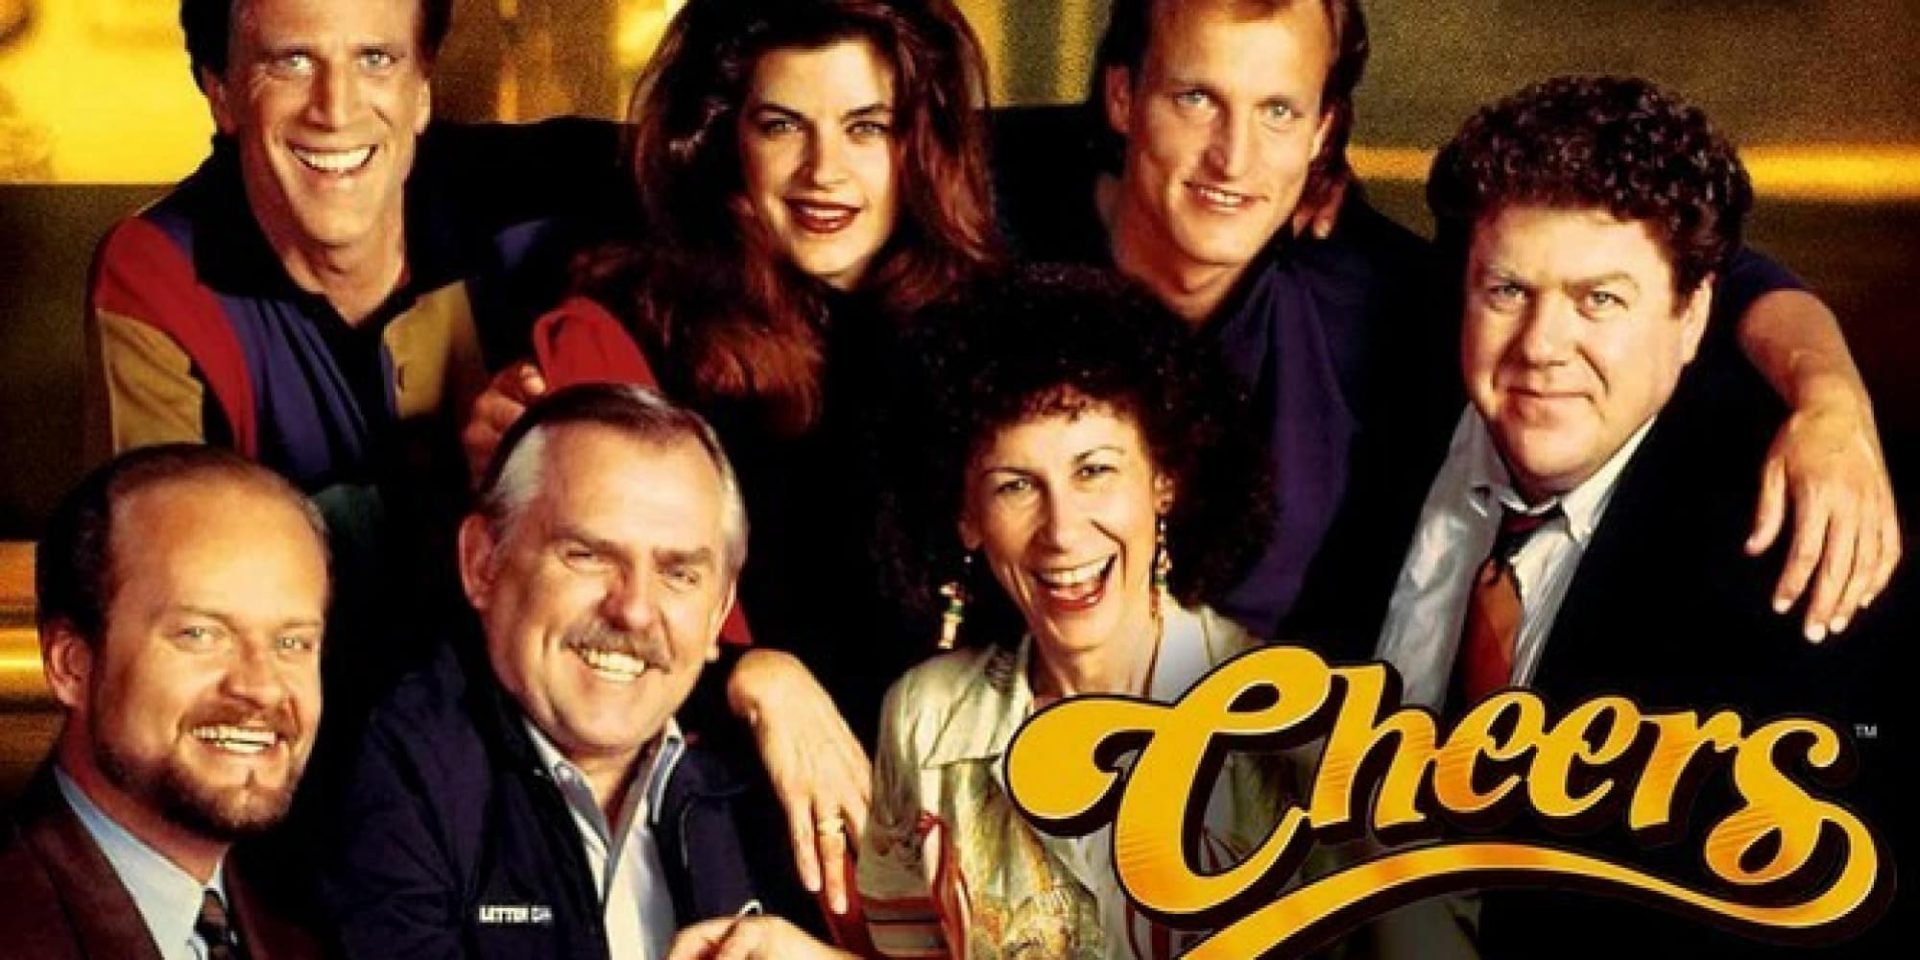 Cheers TV HACK streaming television Top 10 Netflix Comedies